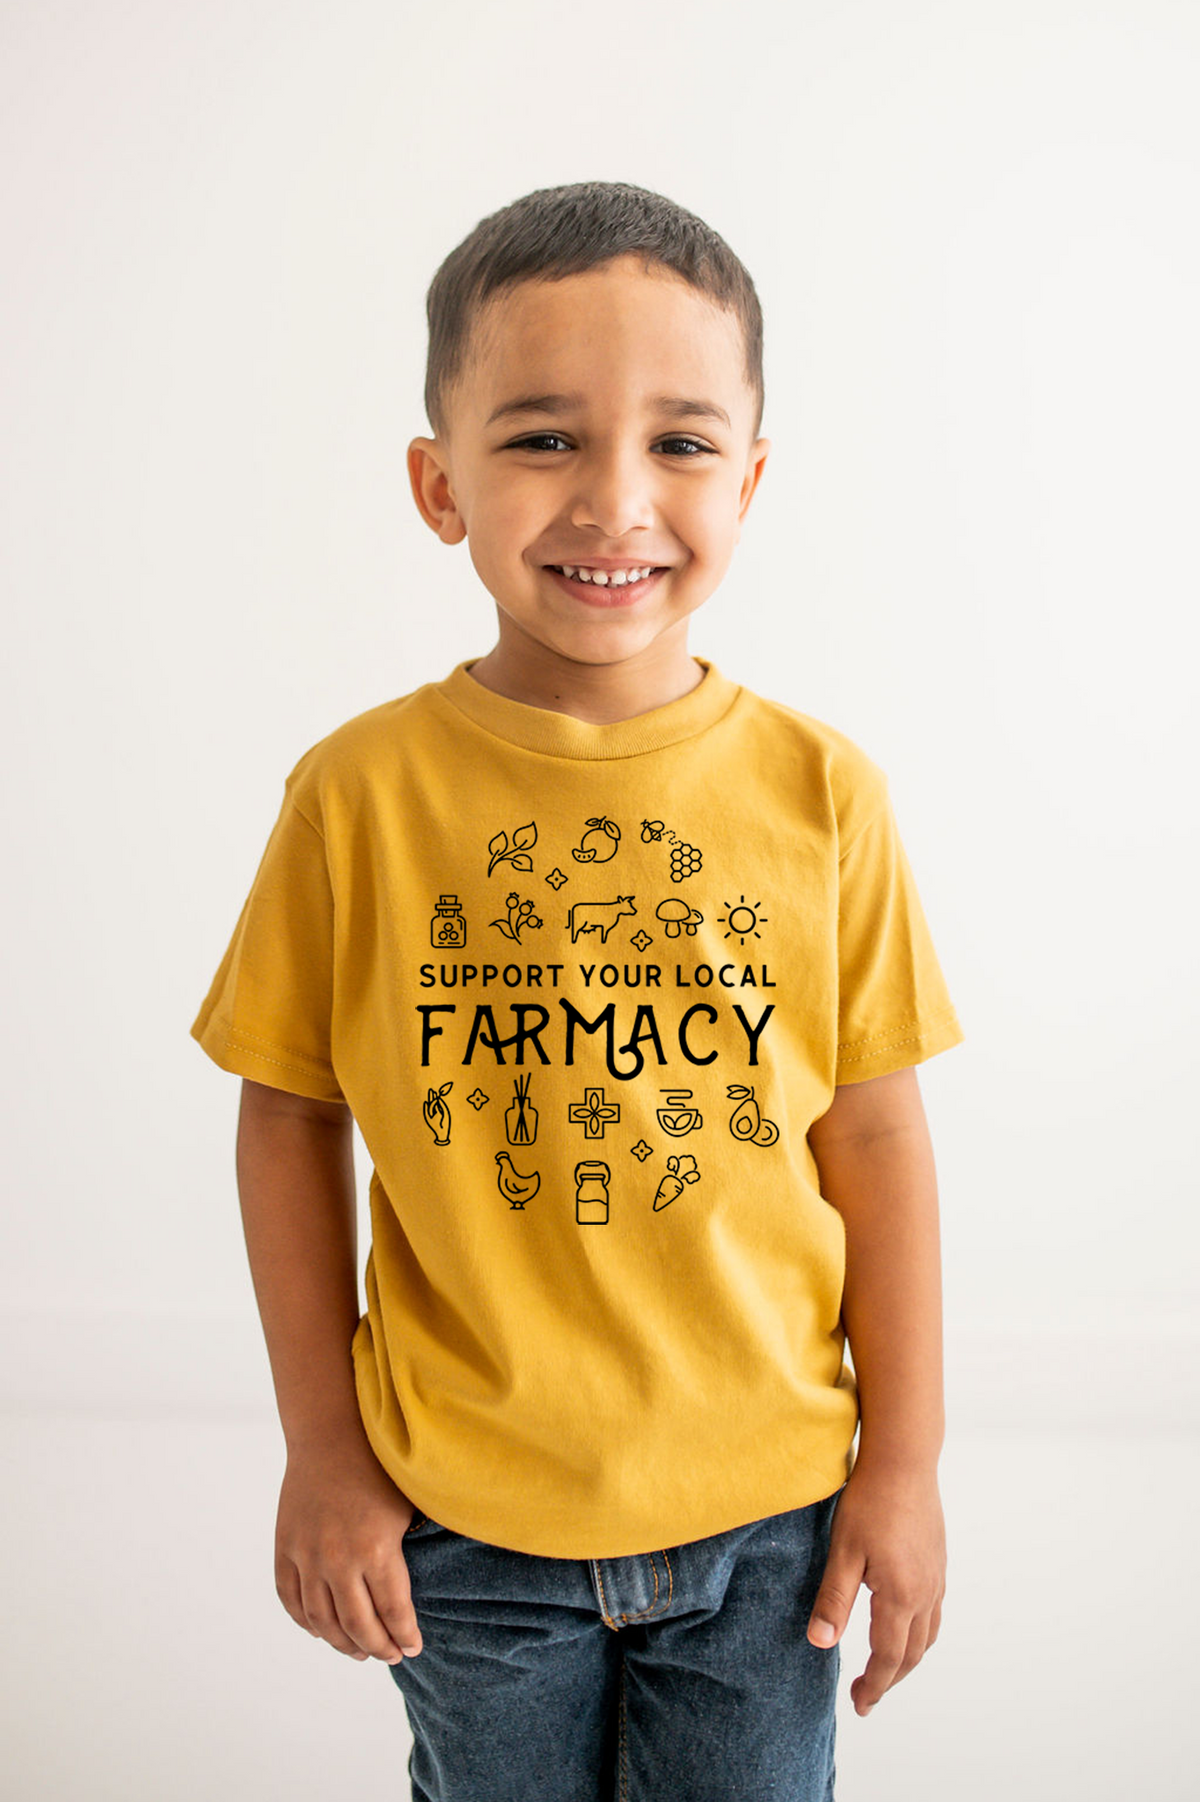 Support Your Local Farmacy Shirt - Kids